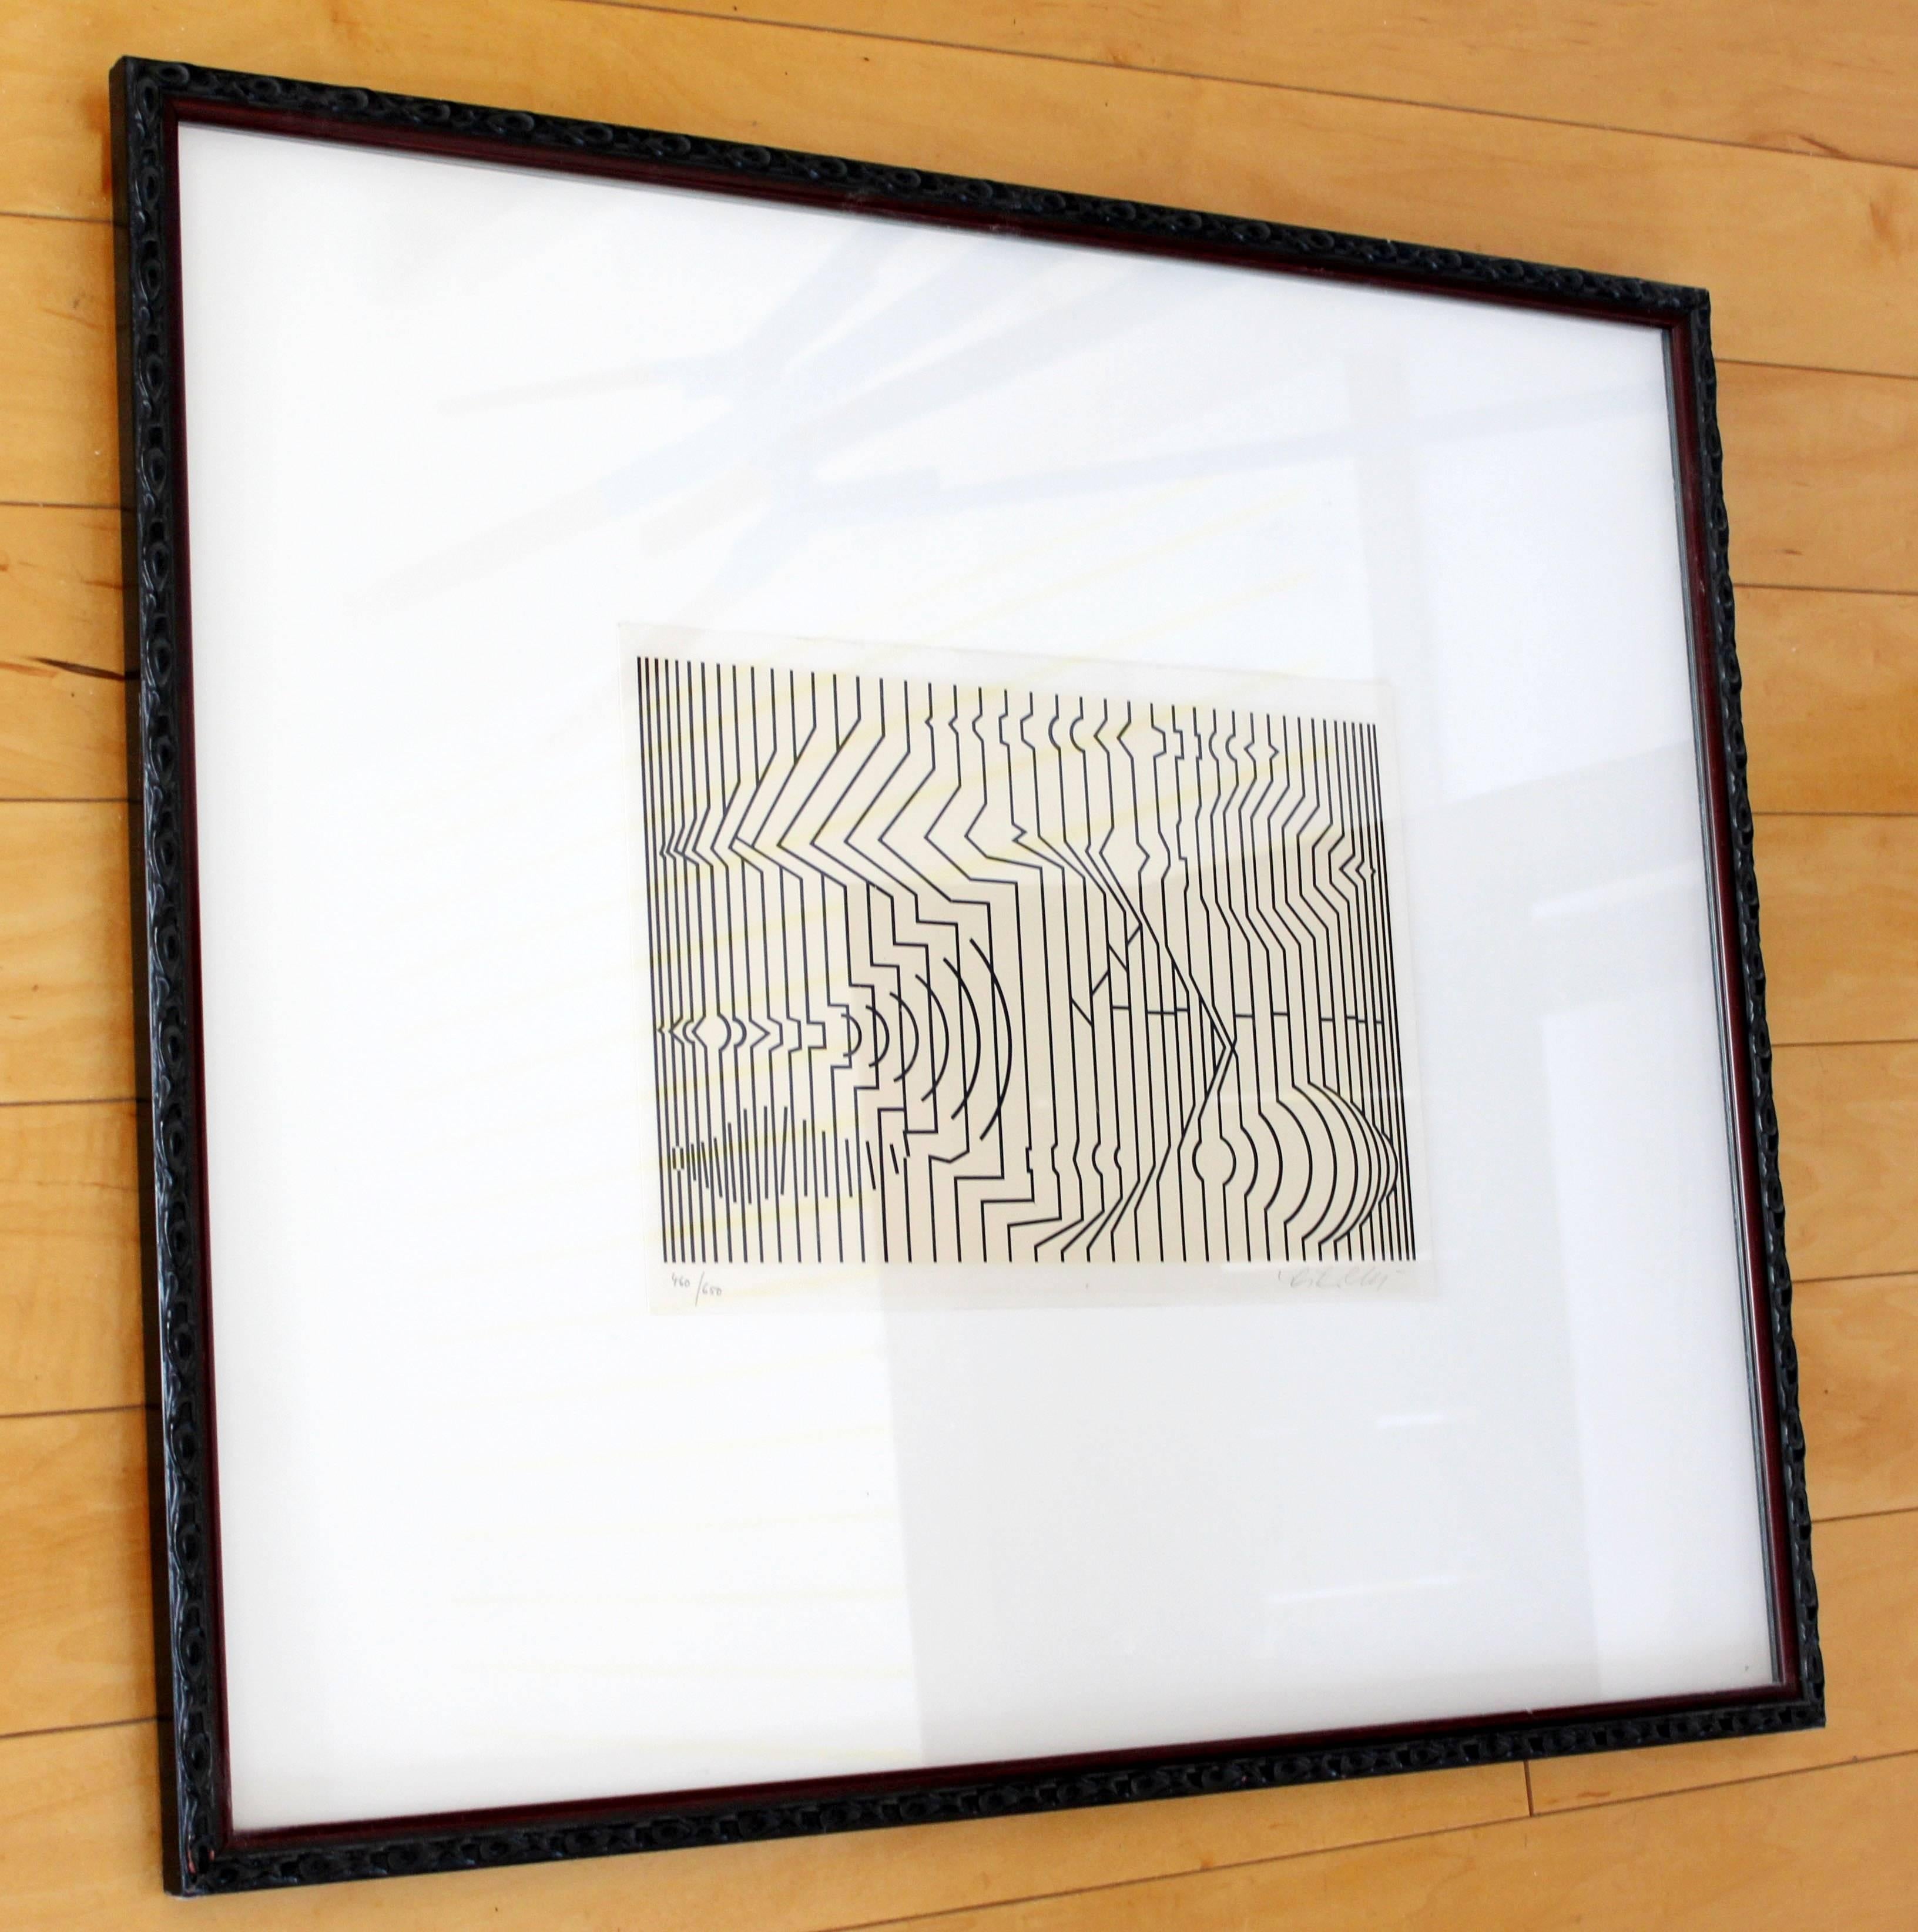 American Mid-Century Modern Framed Pop Art Print Signed Numbered by Vasarely 460/650